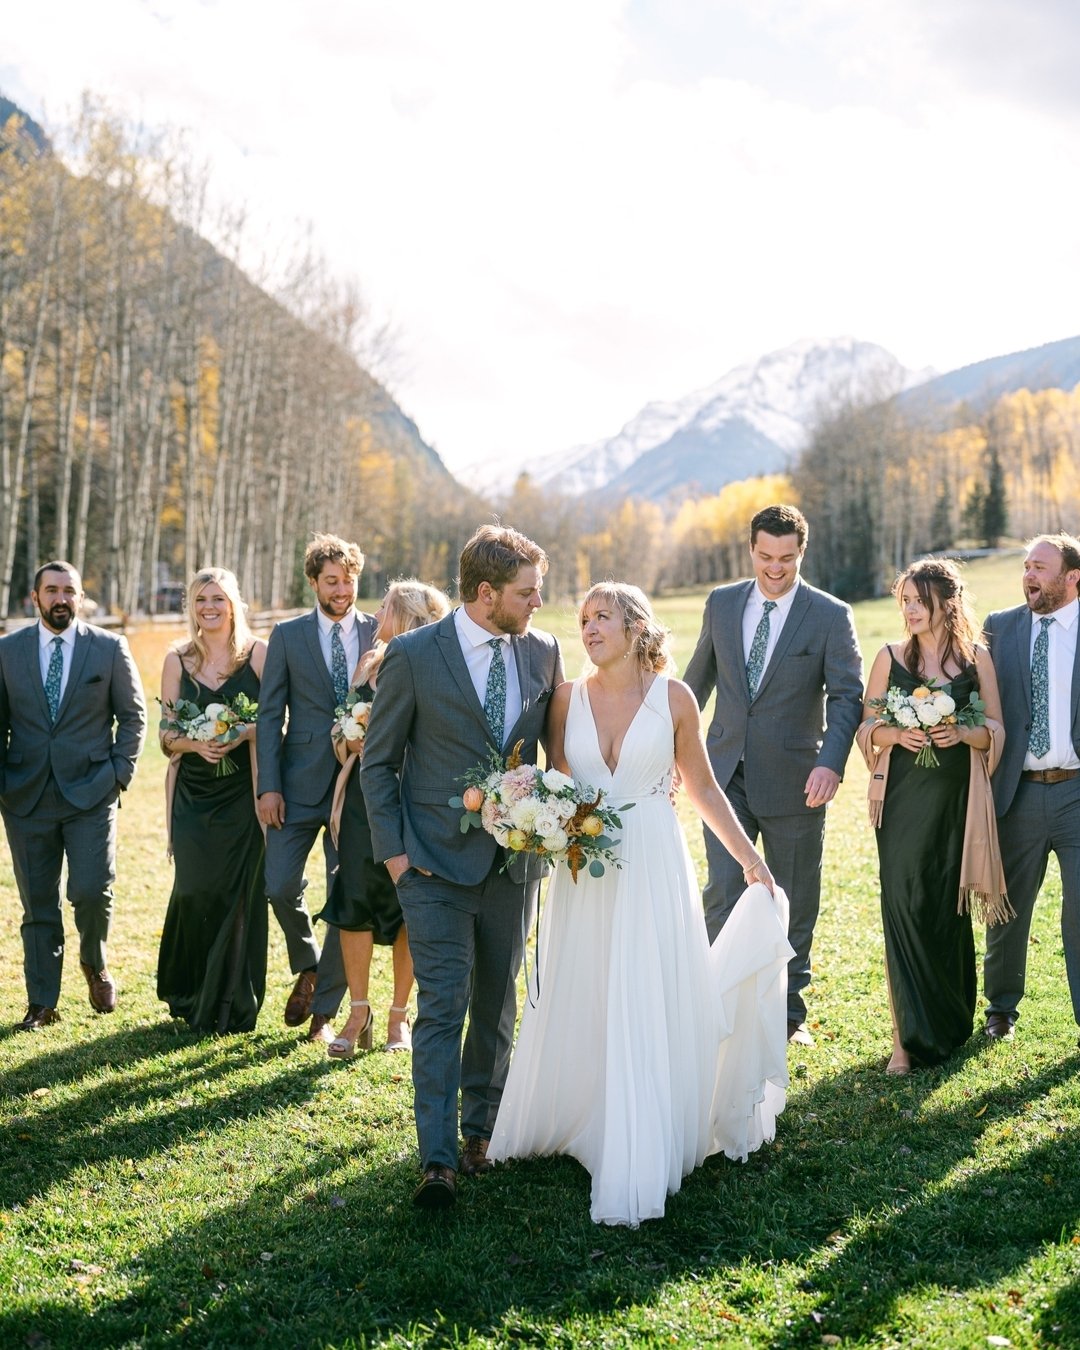 What does a fall wedding look like in Aspen, Colorado? This. 

#coloradowedding #coloradoweddingflorist #coloradoflorist #mountainwedding #mountainweddingflorist #mountainflorist #aspenwedding #aspenweddingflorist #aspenflorist #fallinaspen #aspenint